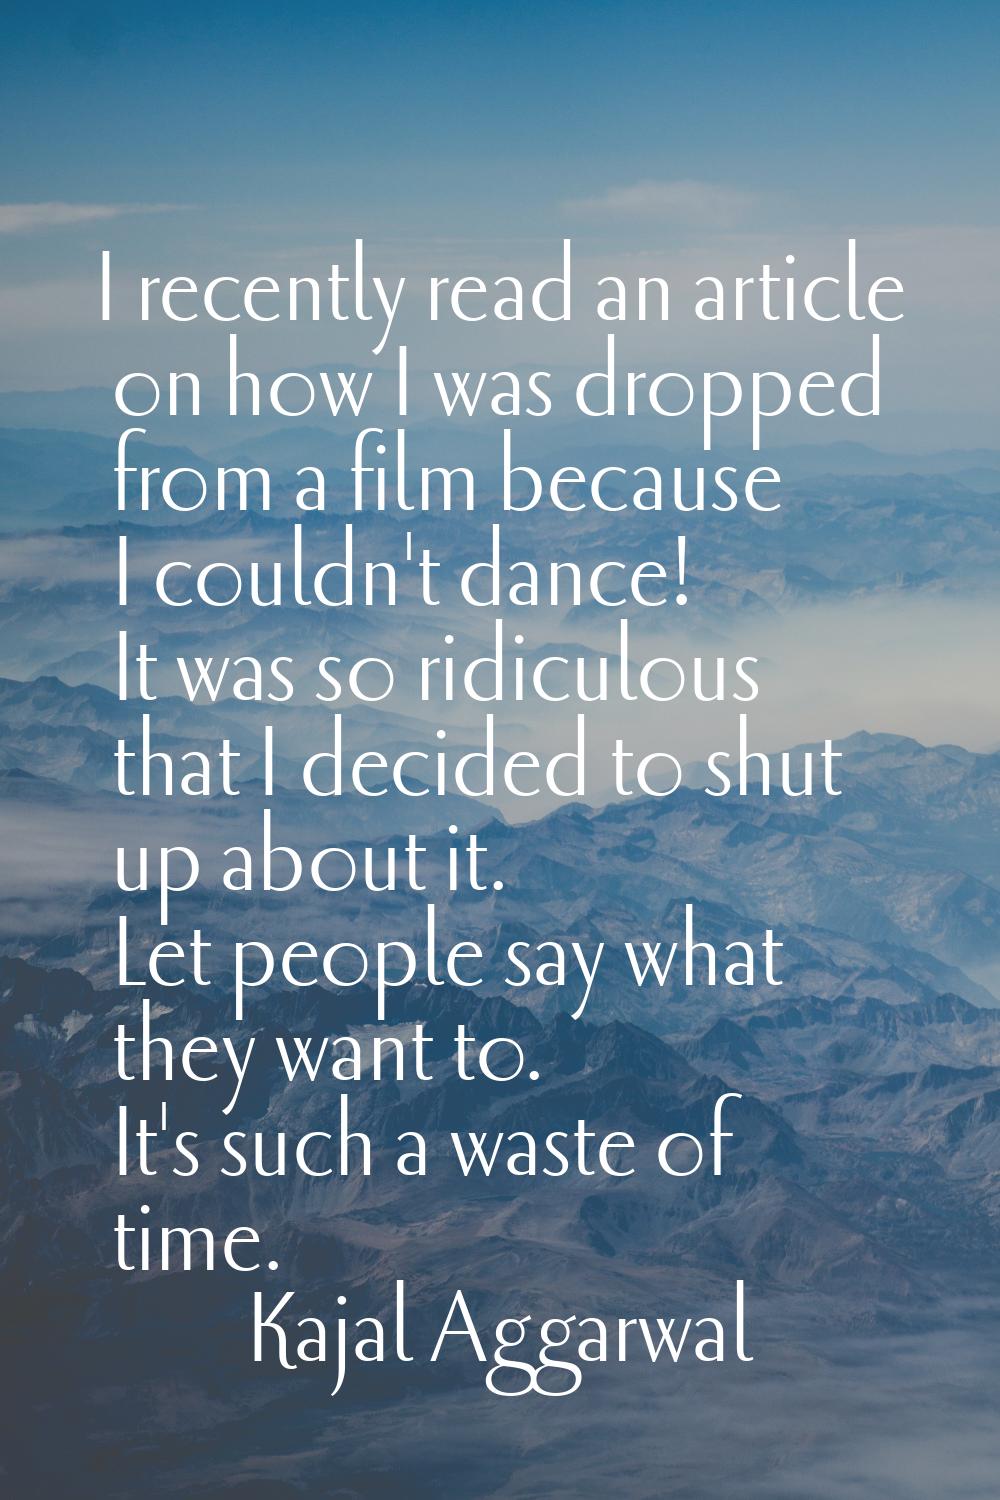 I recently read an article on how I was dropped from a film because I couldn't dance! It was so rid